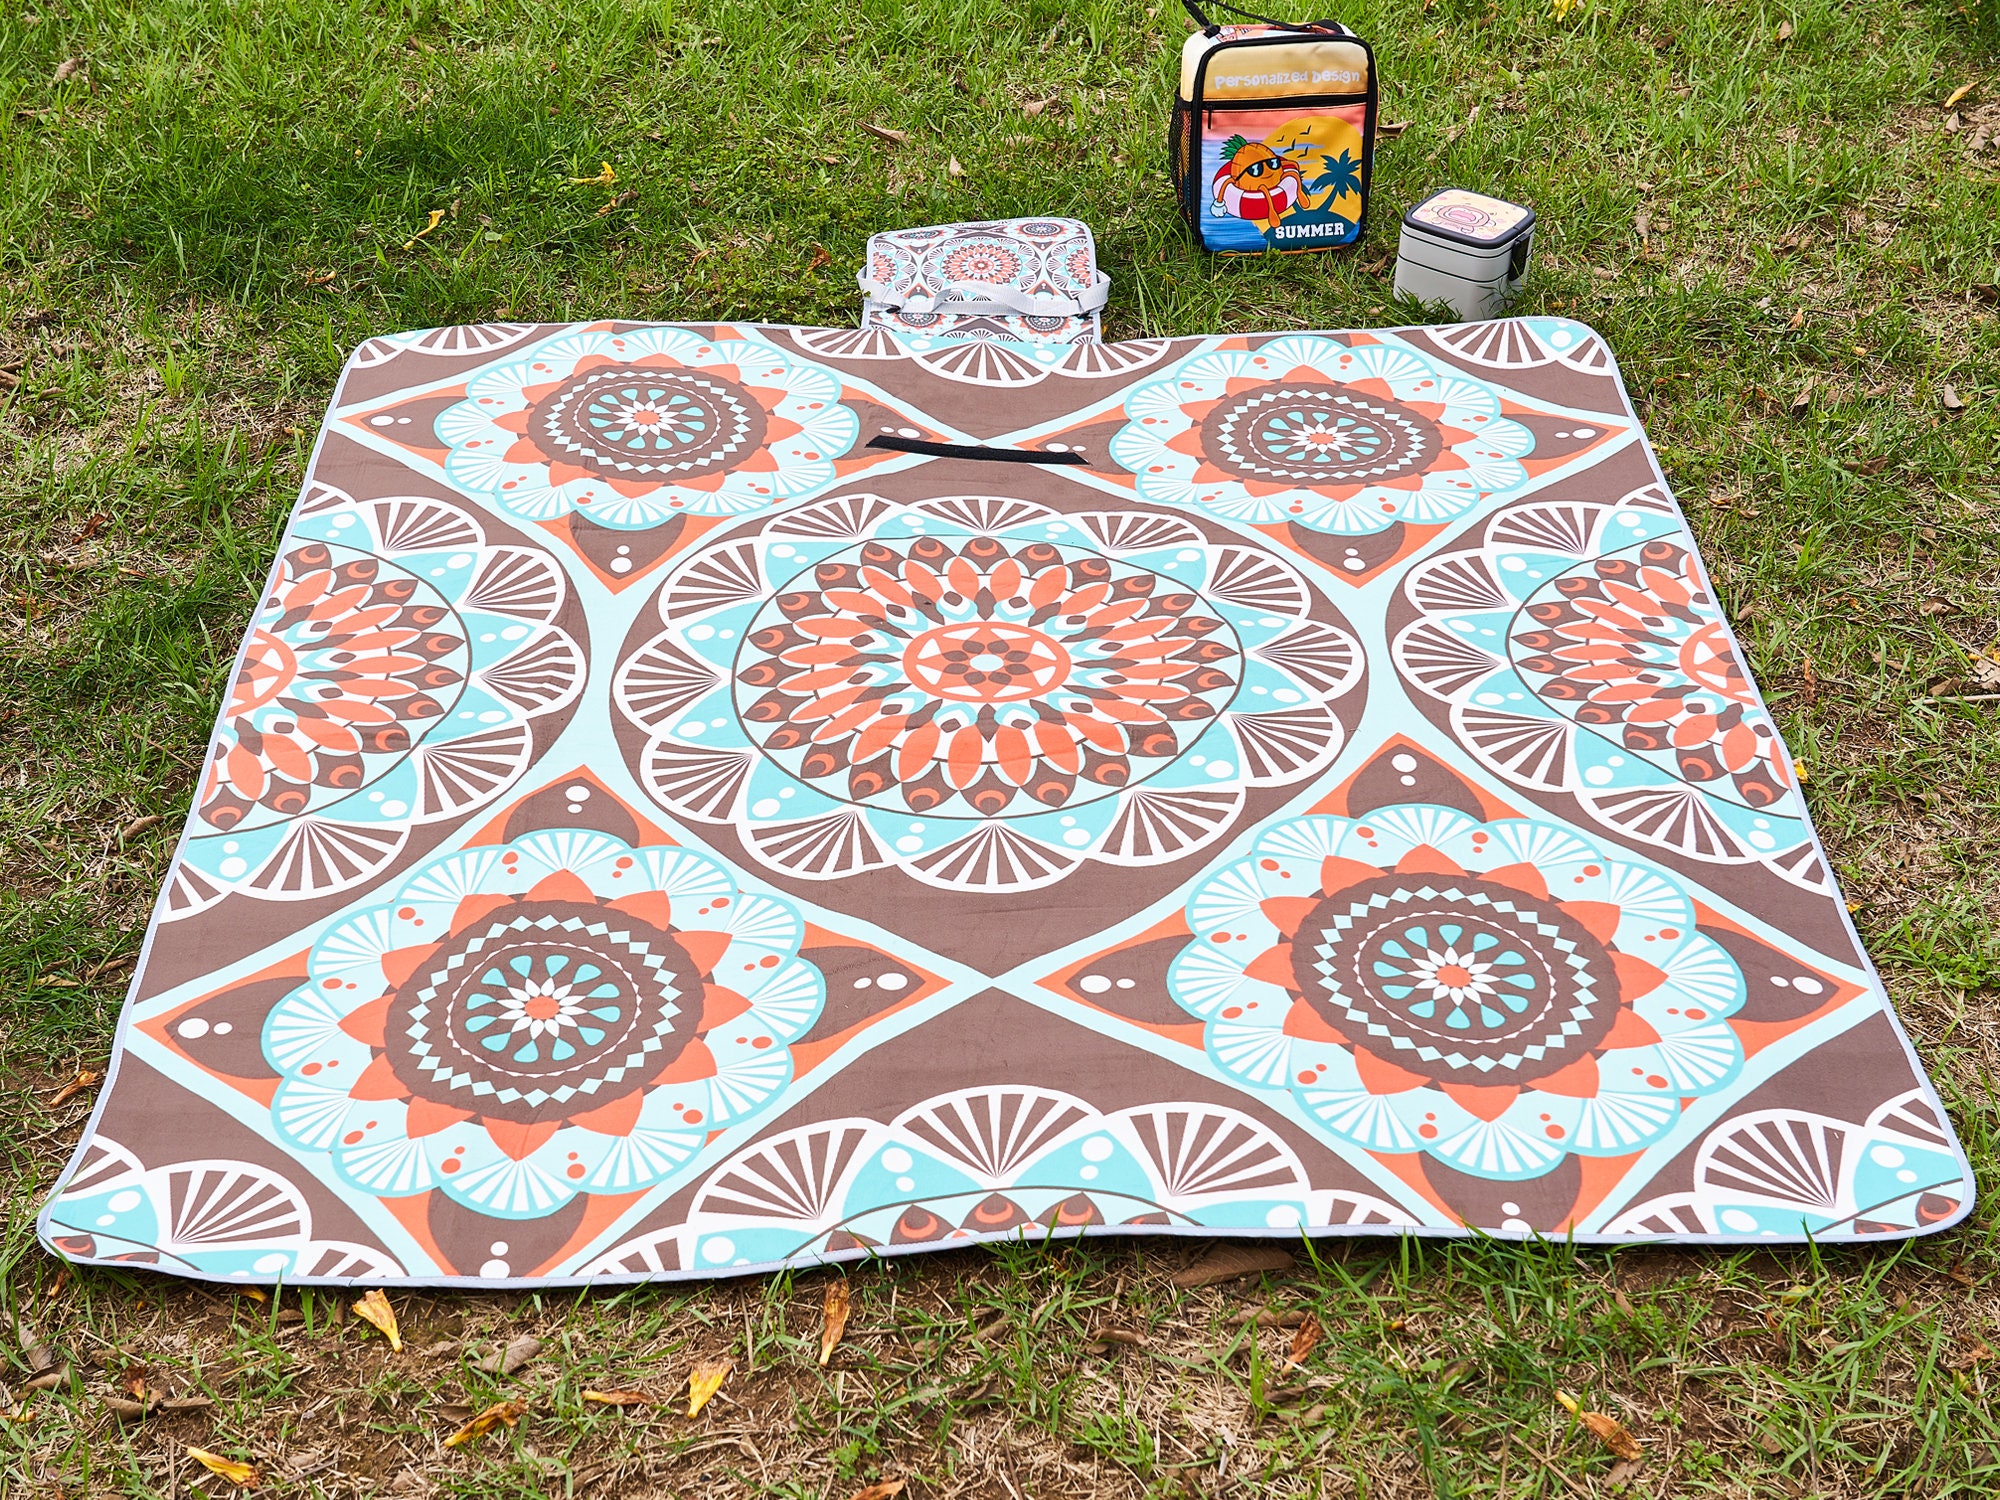 Portable Picnic Blanket 57x59 in Picnic Mat for Beach Travel Camping Lawn  Music Festival Hand Drawn Diamond Yellow Background